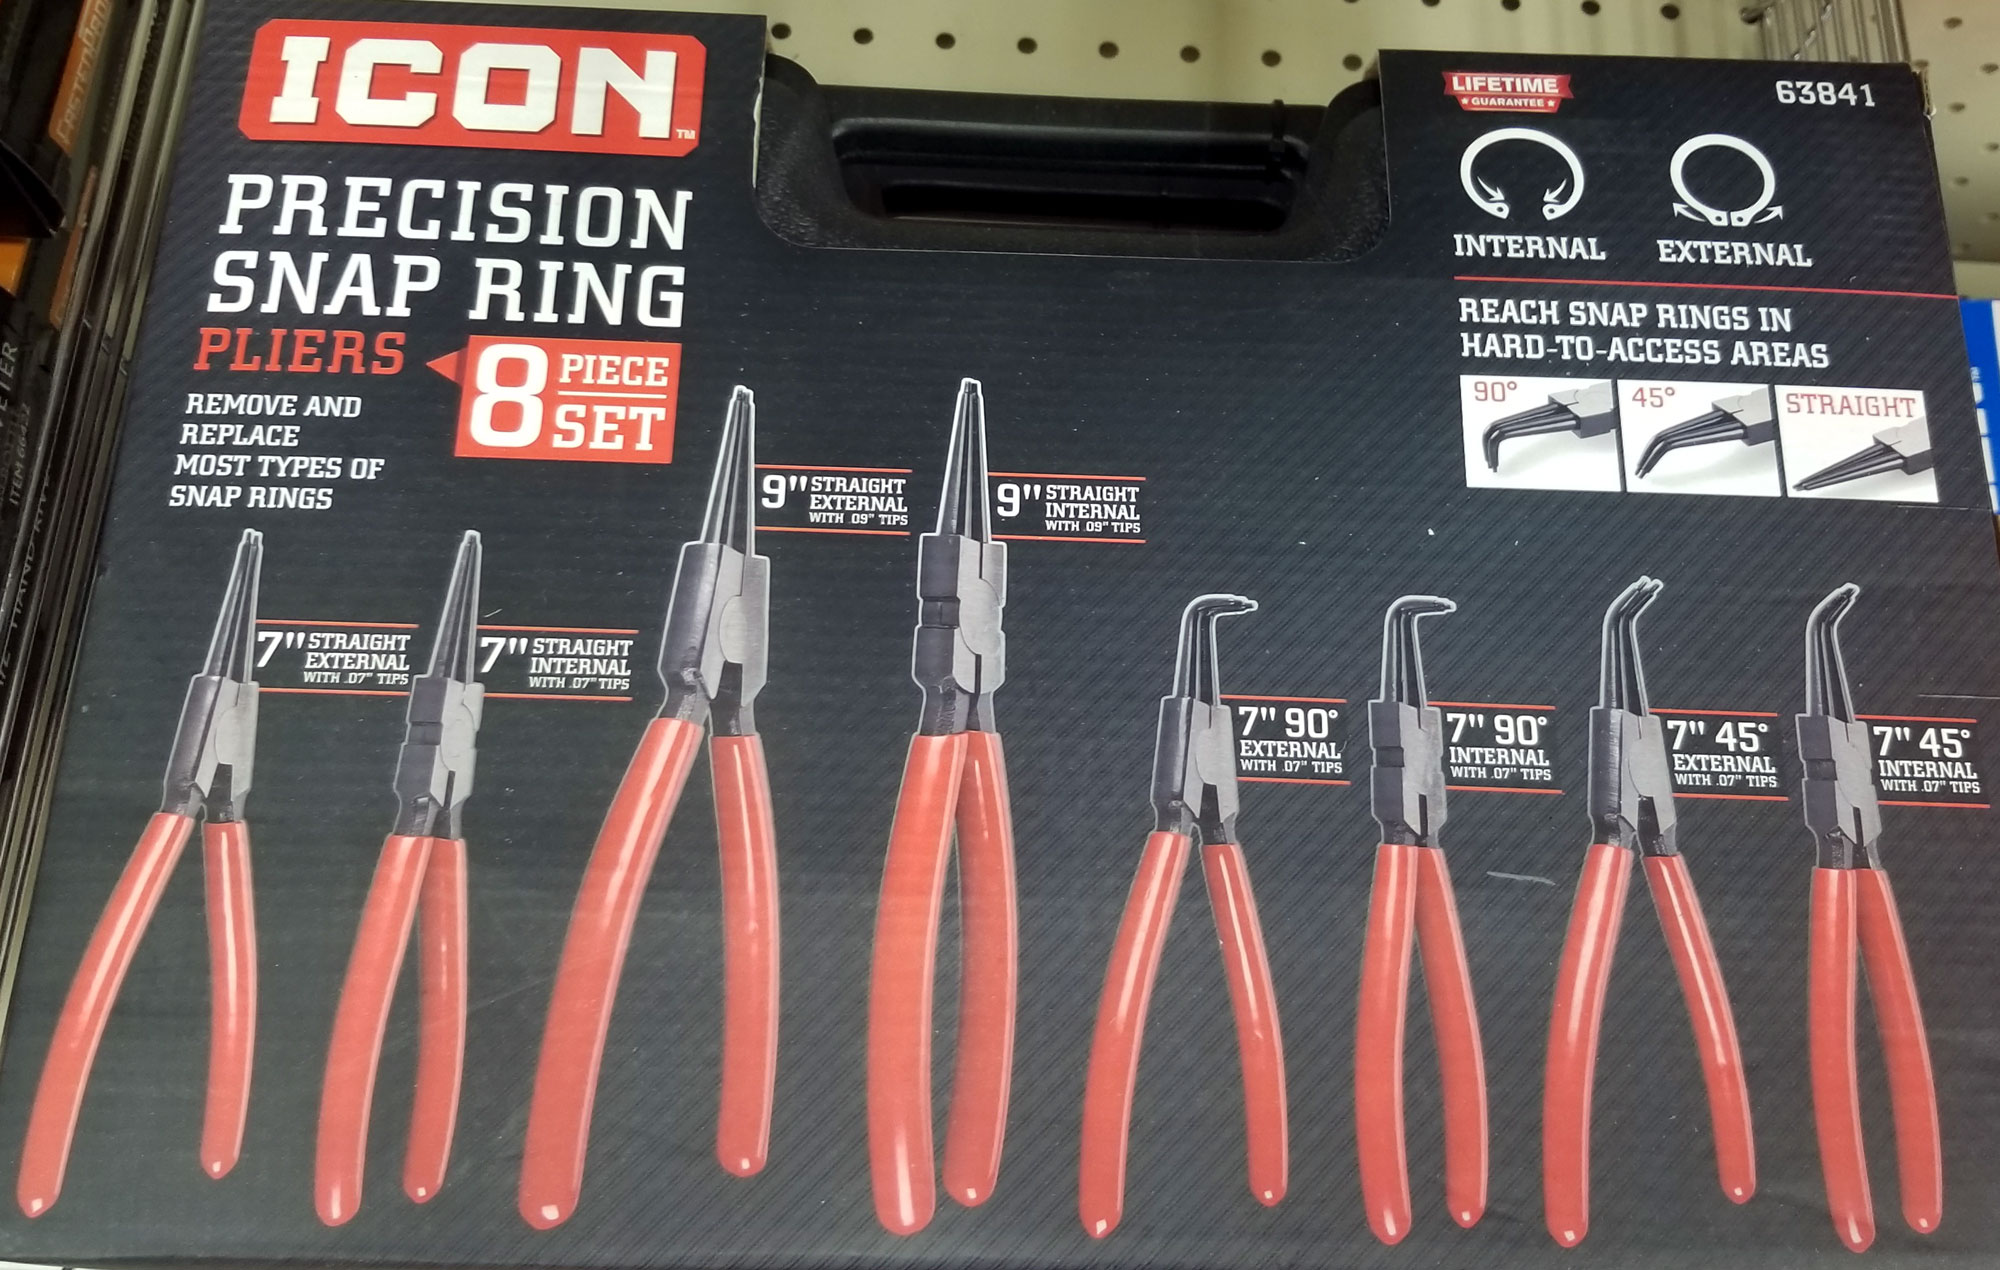 New Snap Ring Plier Set At Harbor Freight Antique Outboard Motor Club Inc